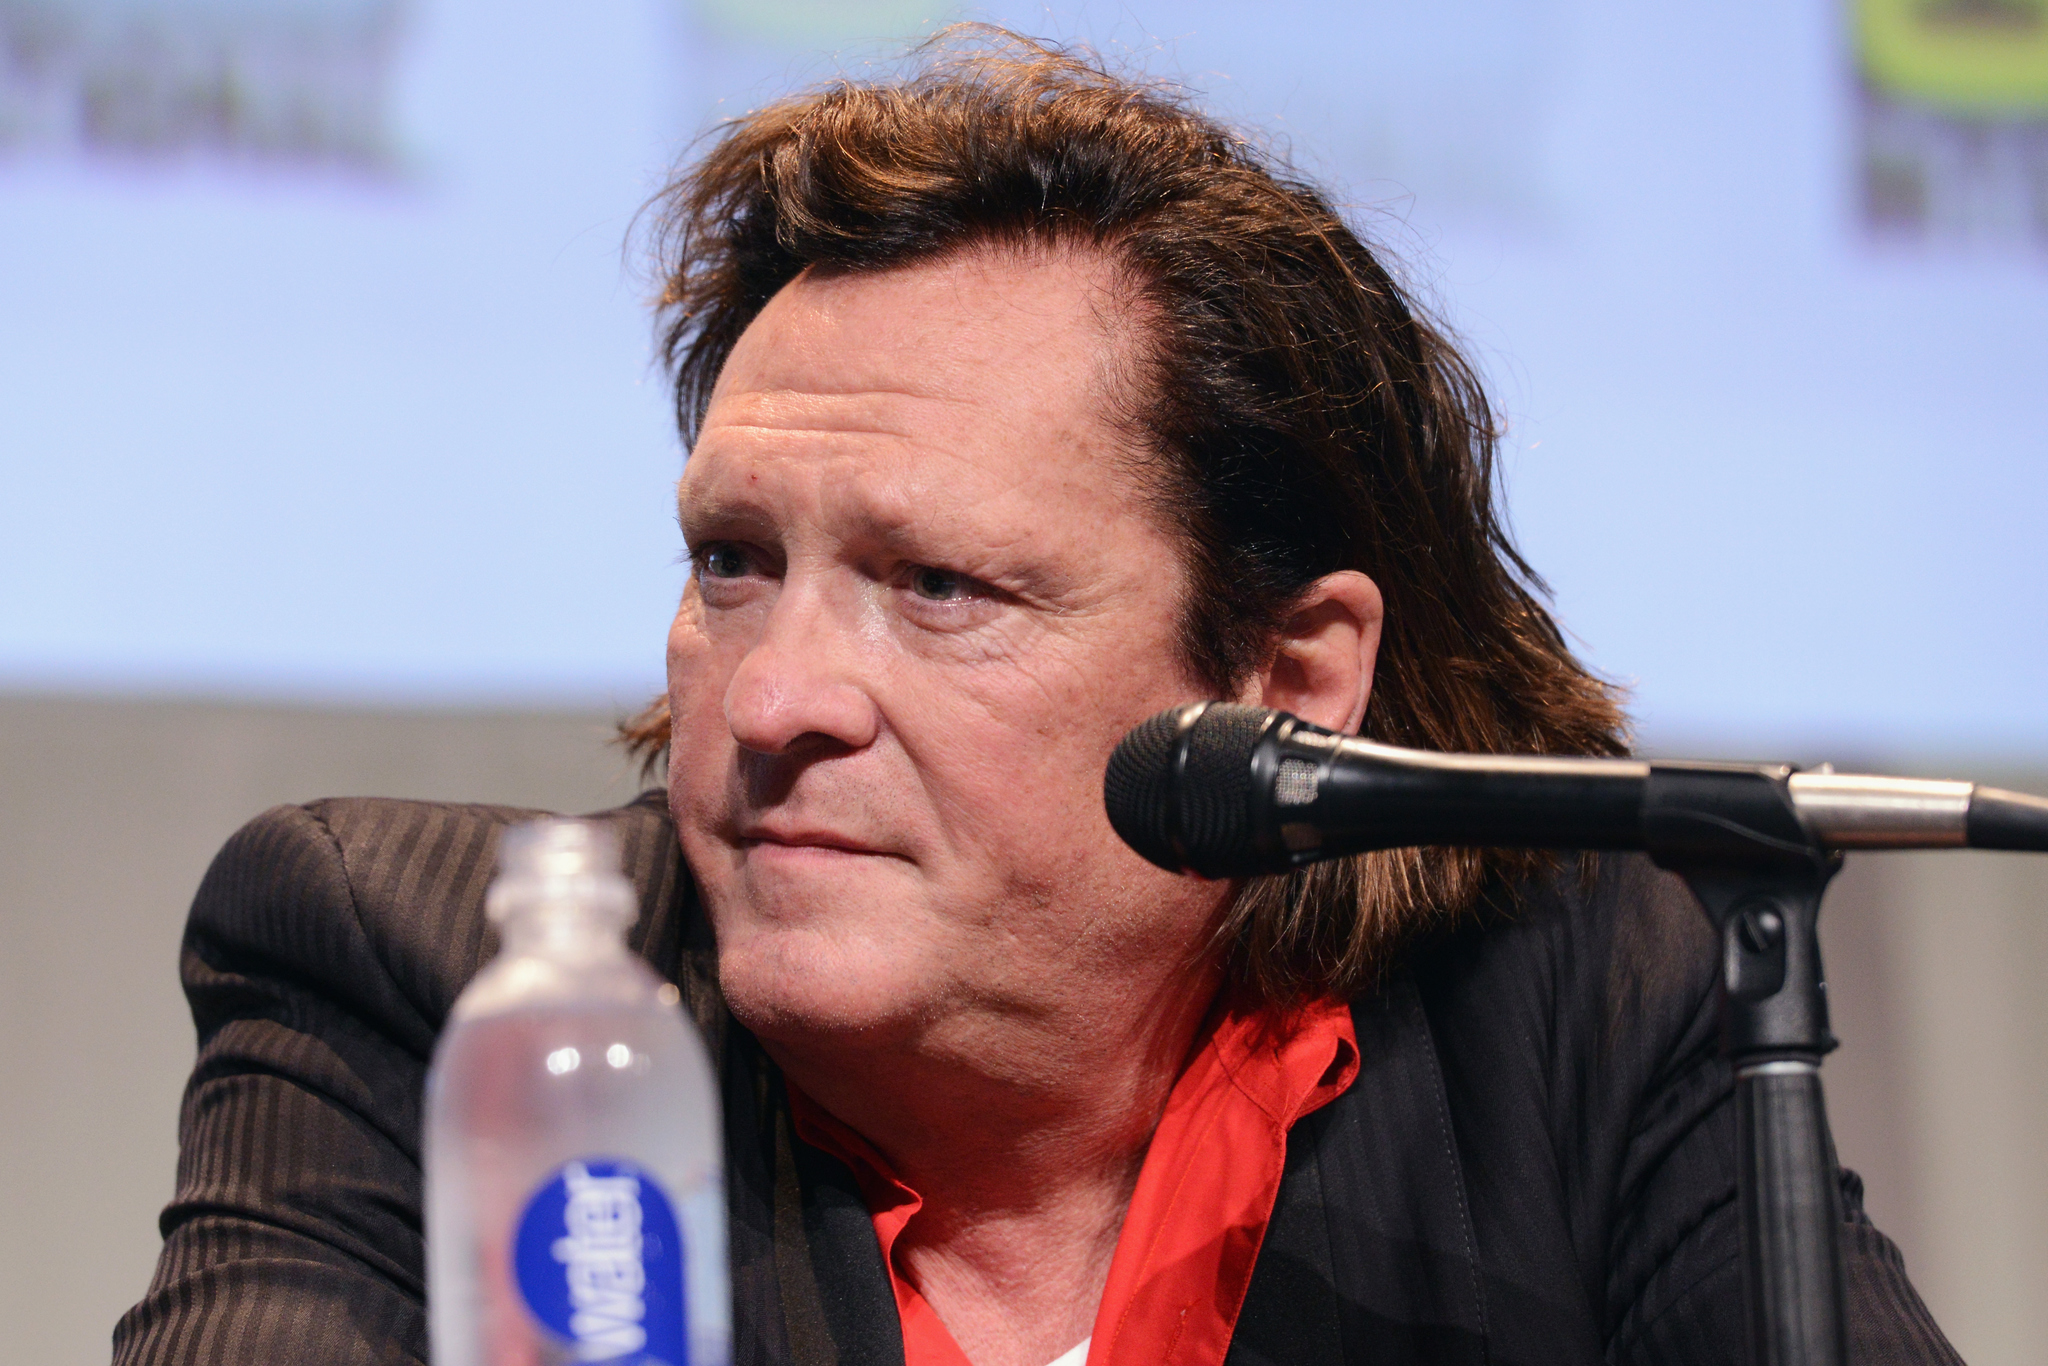 Michael Madsen at event of The Hateful Eight (2015)